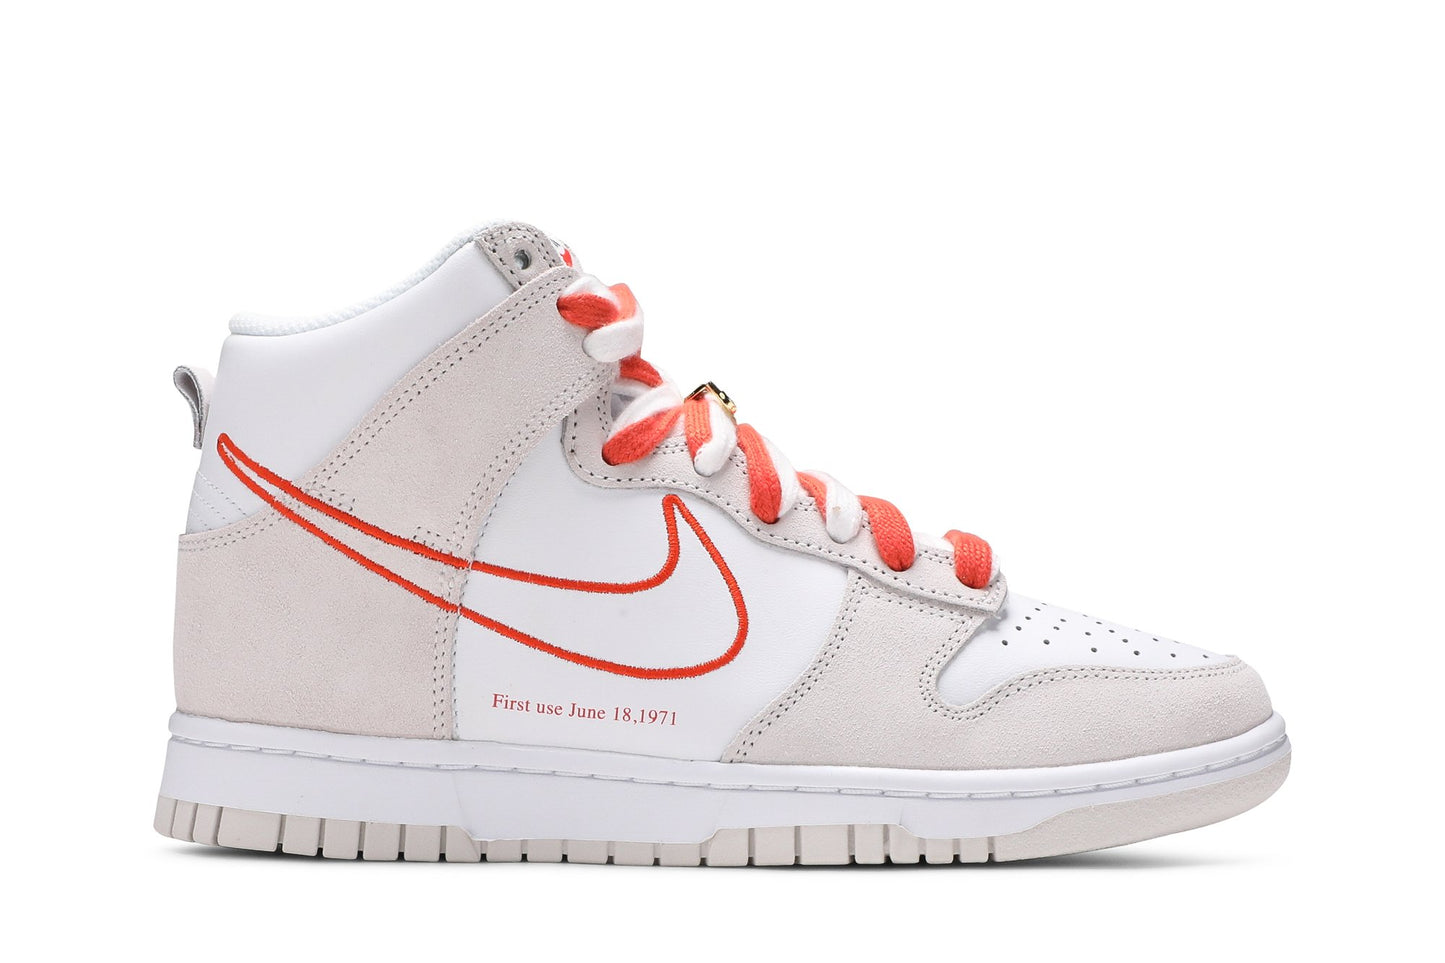 Wmns Dunk High SE 'First Use Pack-White Orange' DH6758-100